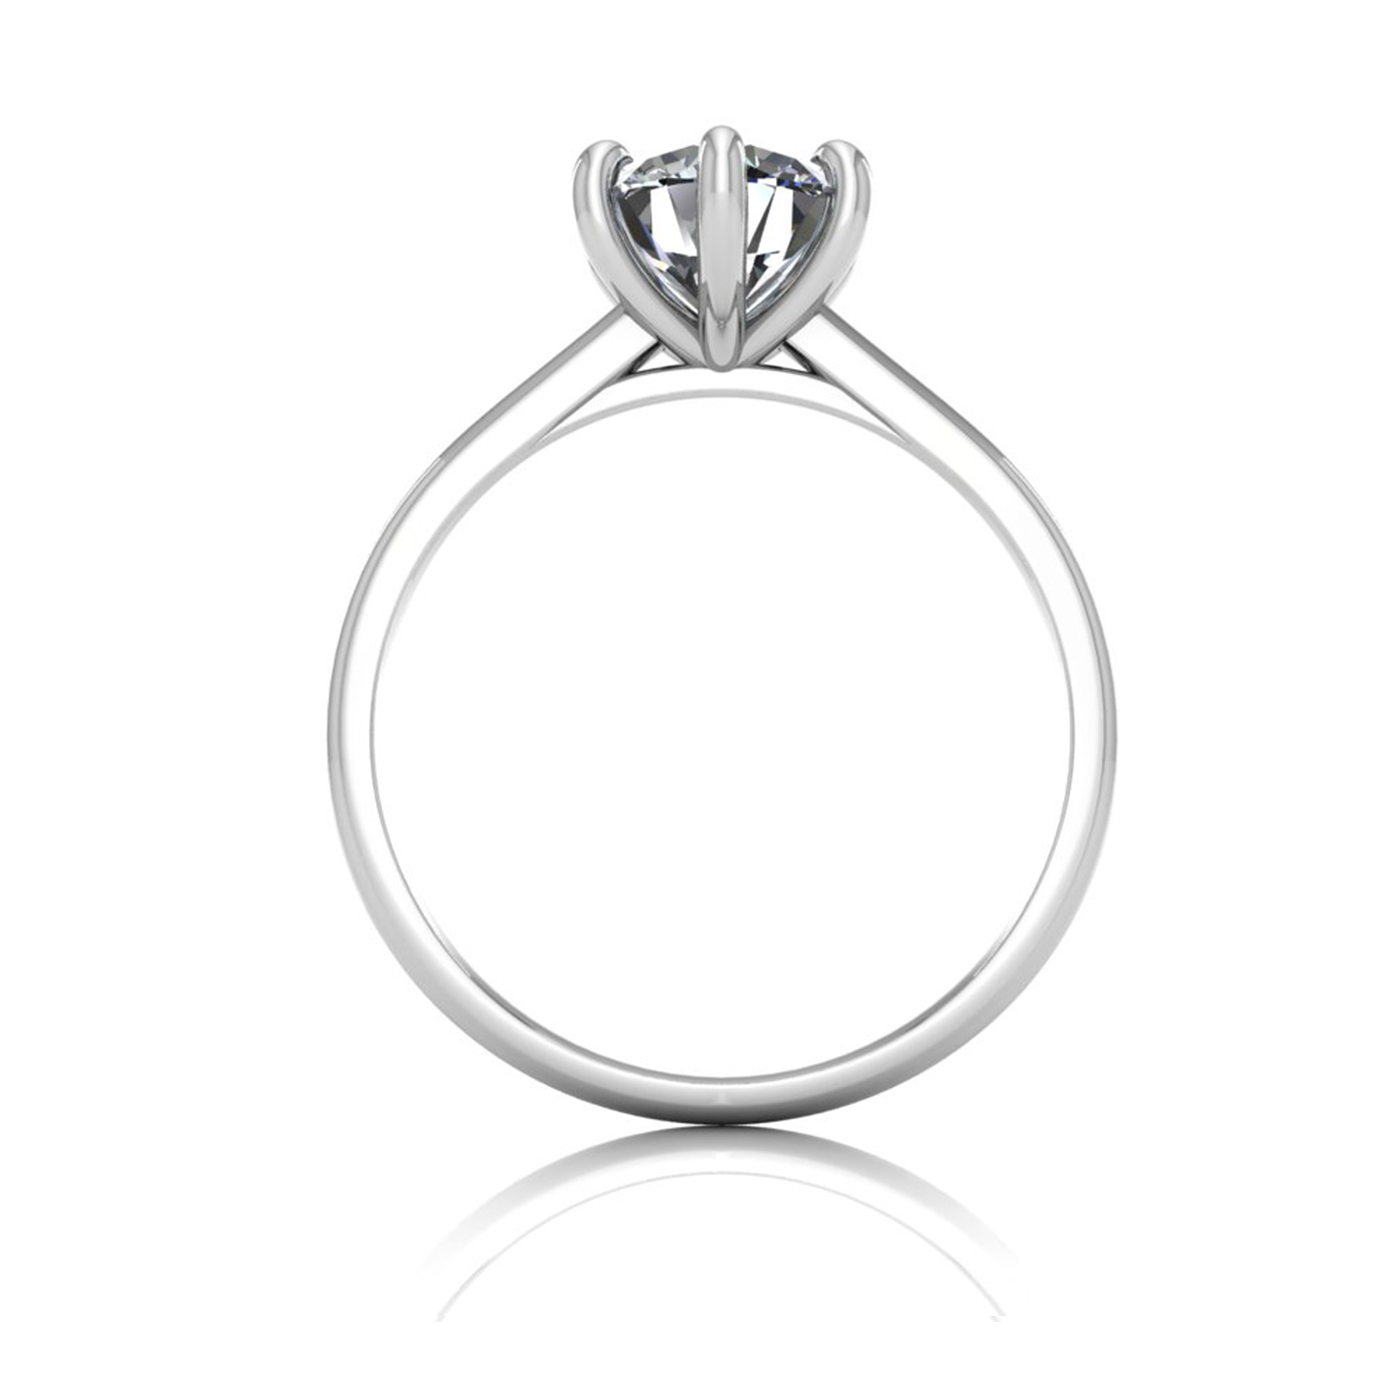 18k white gold 1,20 ct 6 prongs solitaire round cut diamond engagement ring with whisper thin band